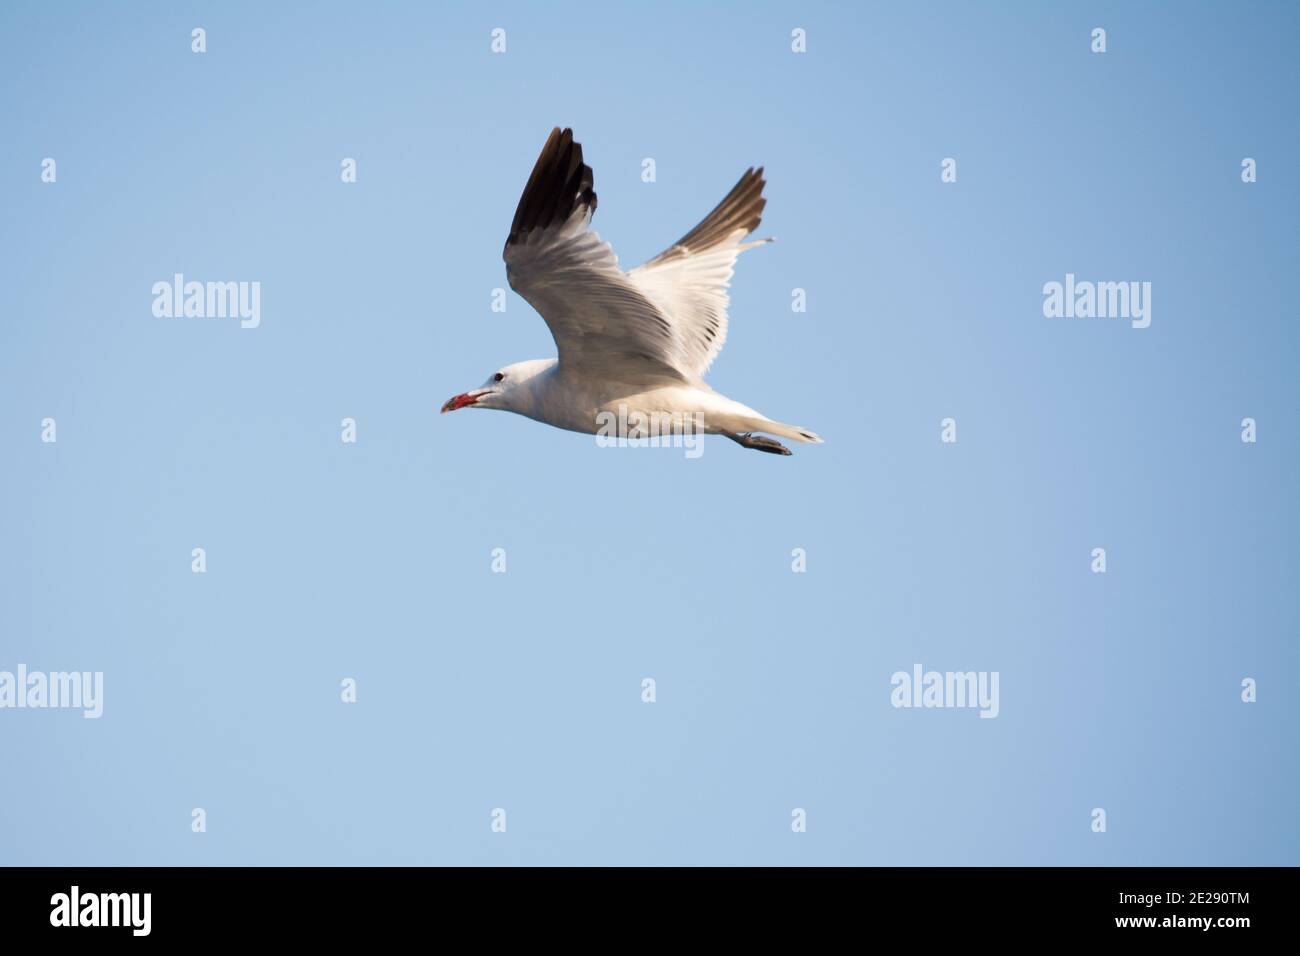 White seagull flying in the clean blue sky with wings spreaded Stock Photo